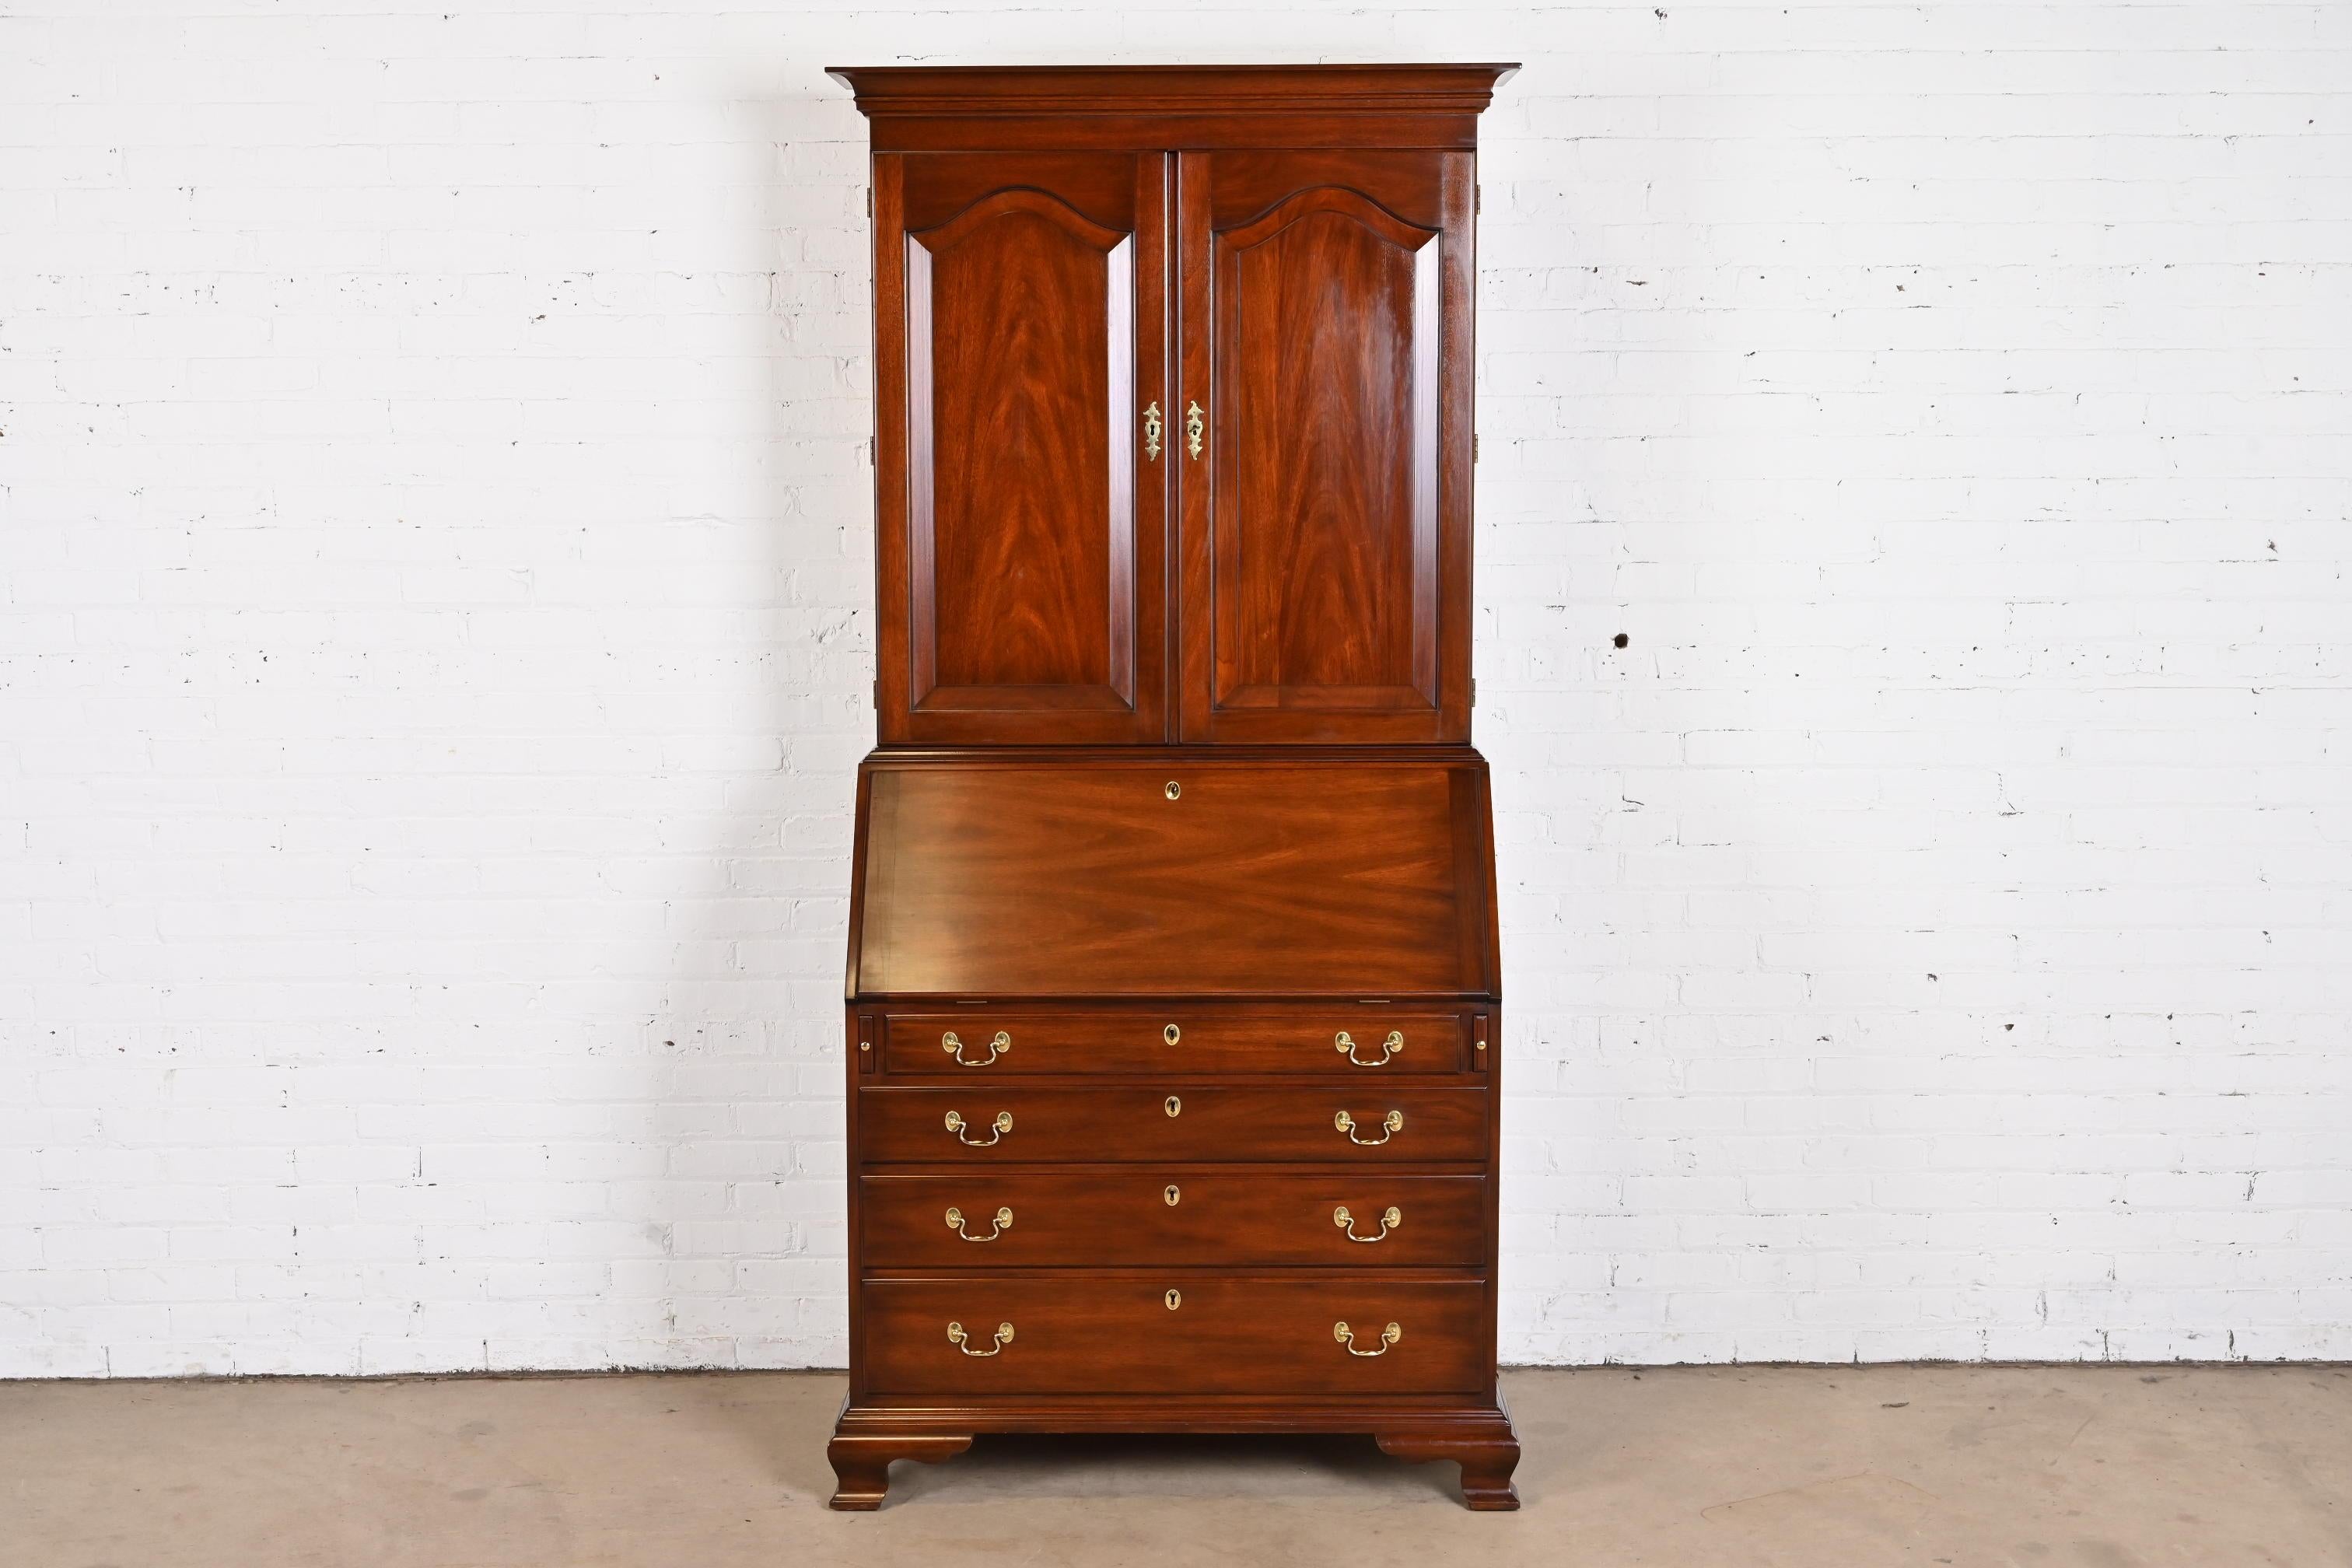 A gorgeous Georgian or Chippendale style bureau with slant front secretary desk and bookcase hutch

By Henkel Harris

USA, 1980s

Carved solid mahogany, with original brass hardware. Desk and drawers lock, and key is included.

Measures: